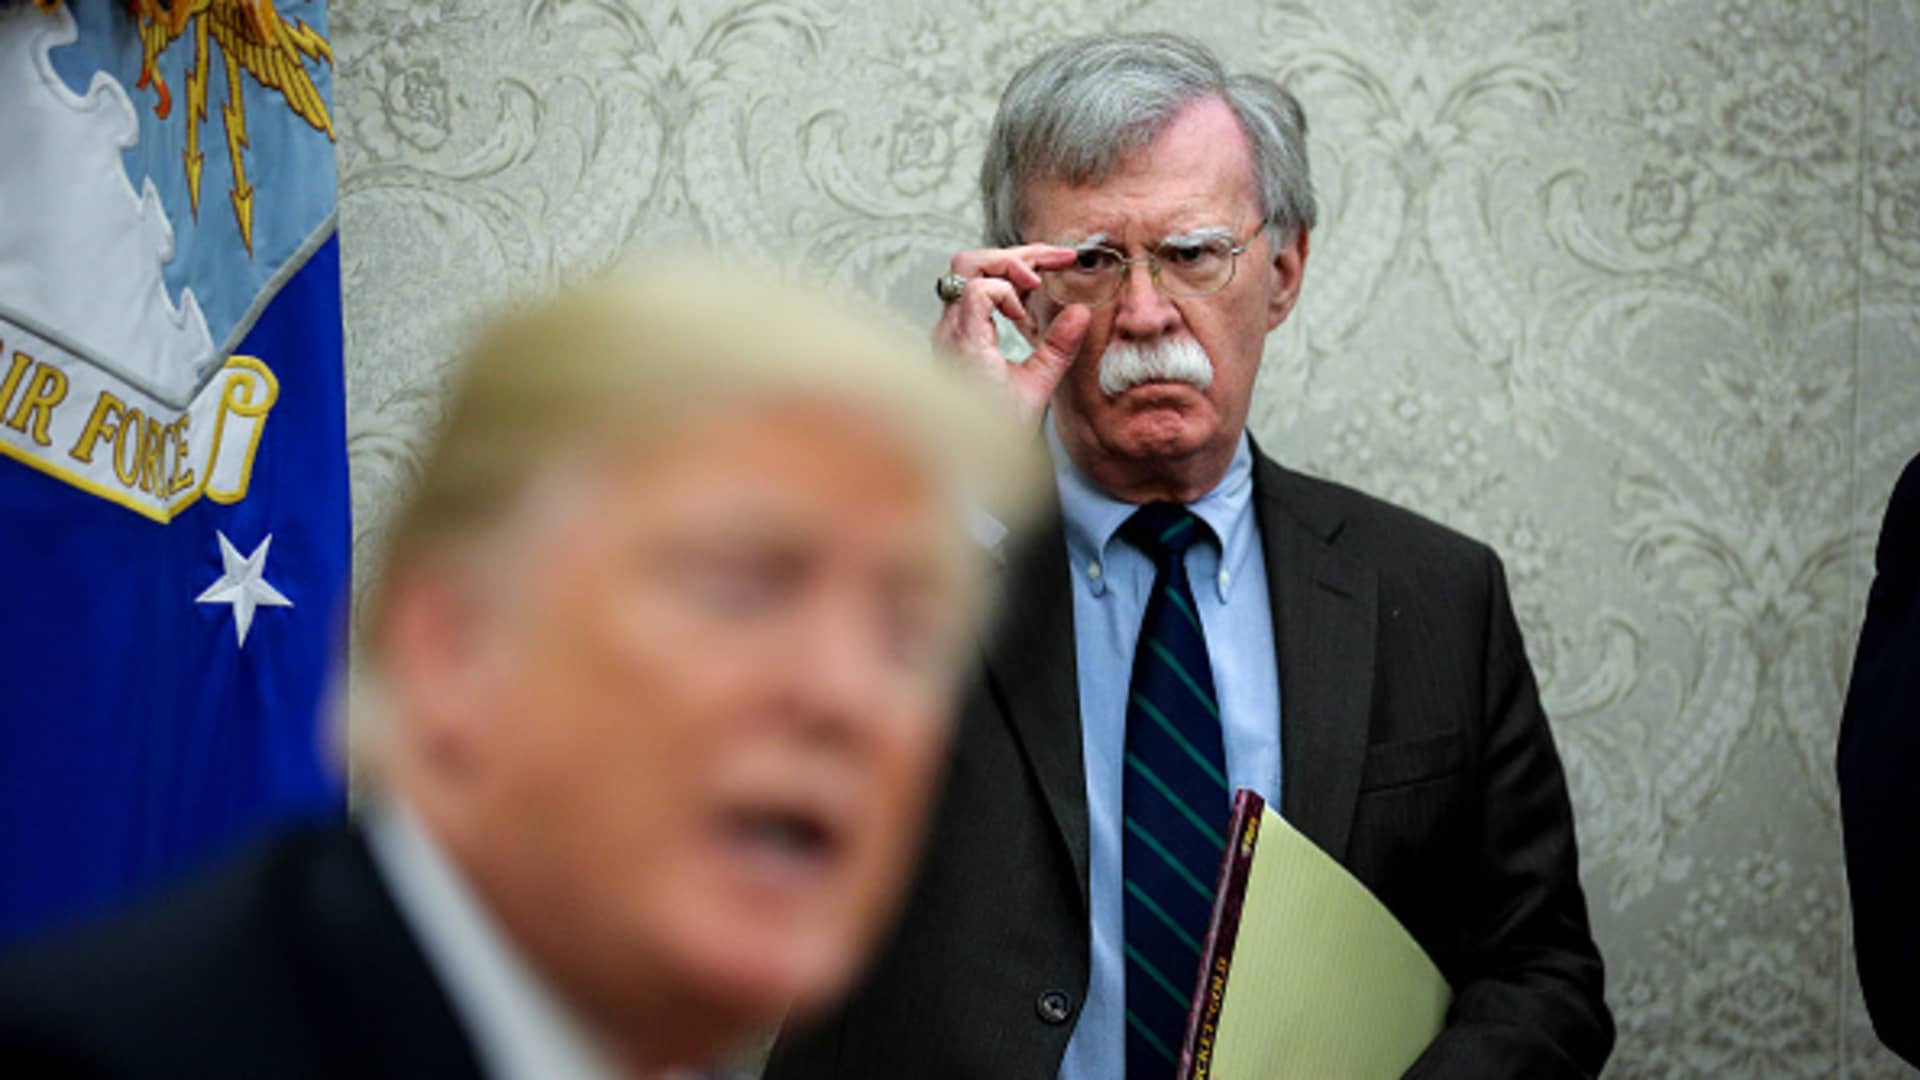 National security advisor, John Bolton, right, attends a meeting with President Donald Trump and President of Chile, Sebastian Piñera in the Oval Office of the White House on September 28, 2018 in Washington, DC.